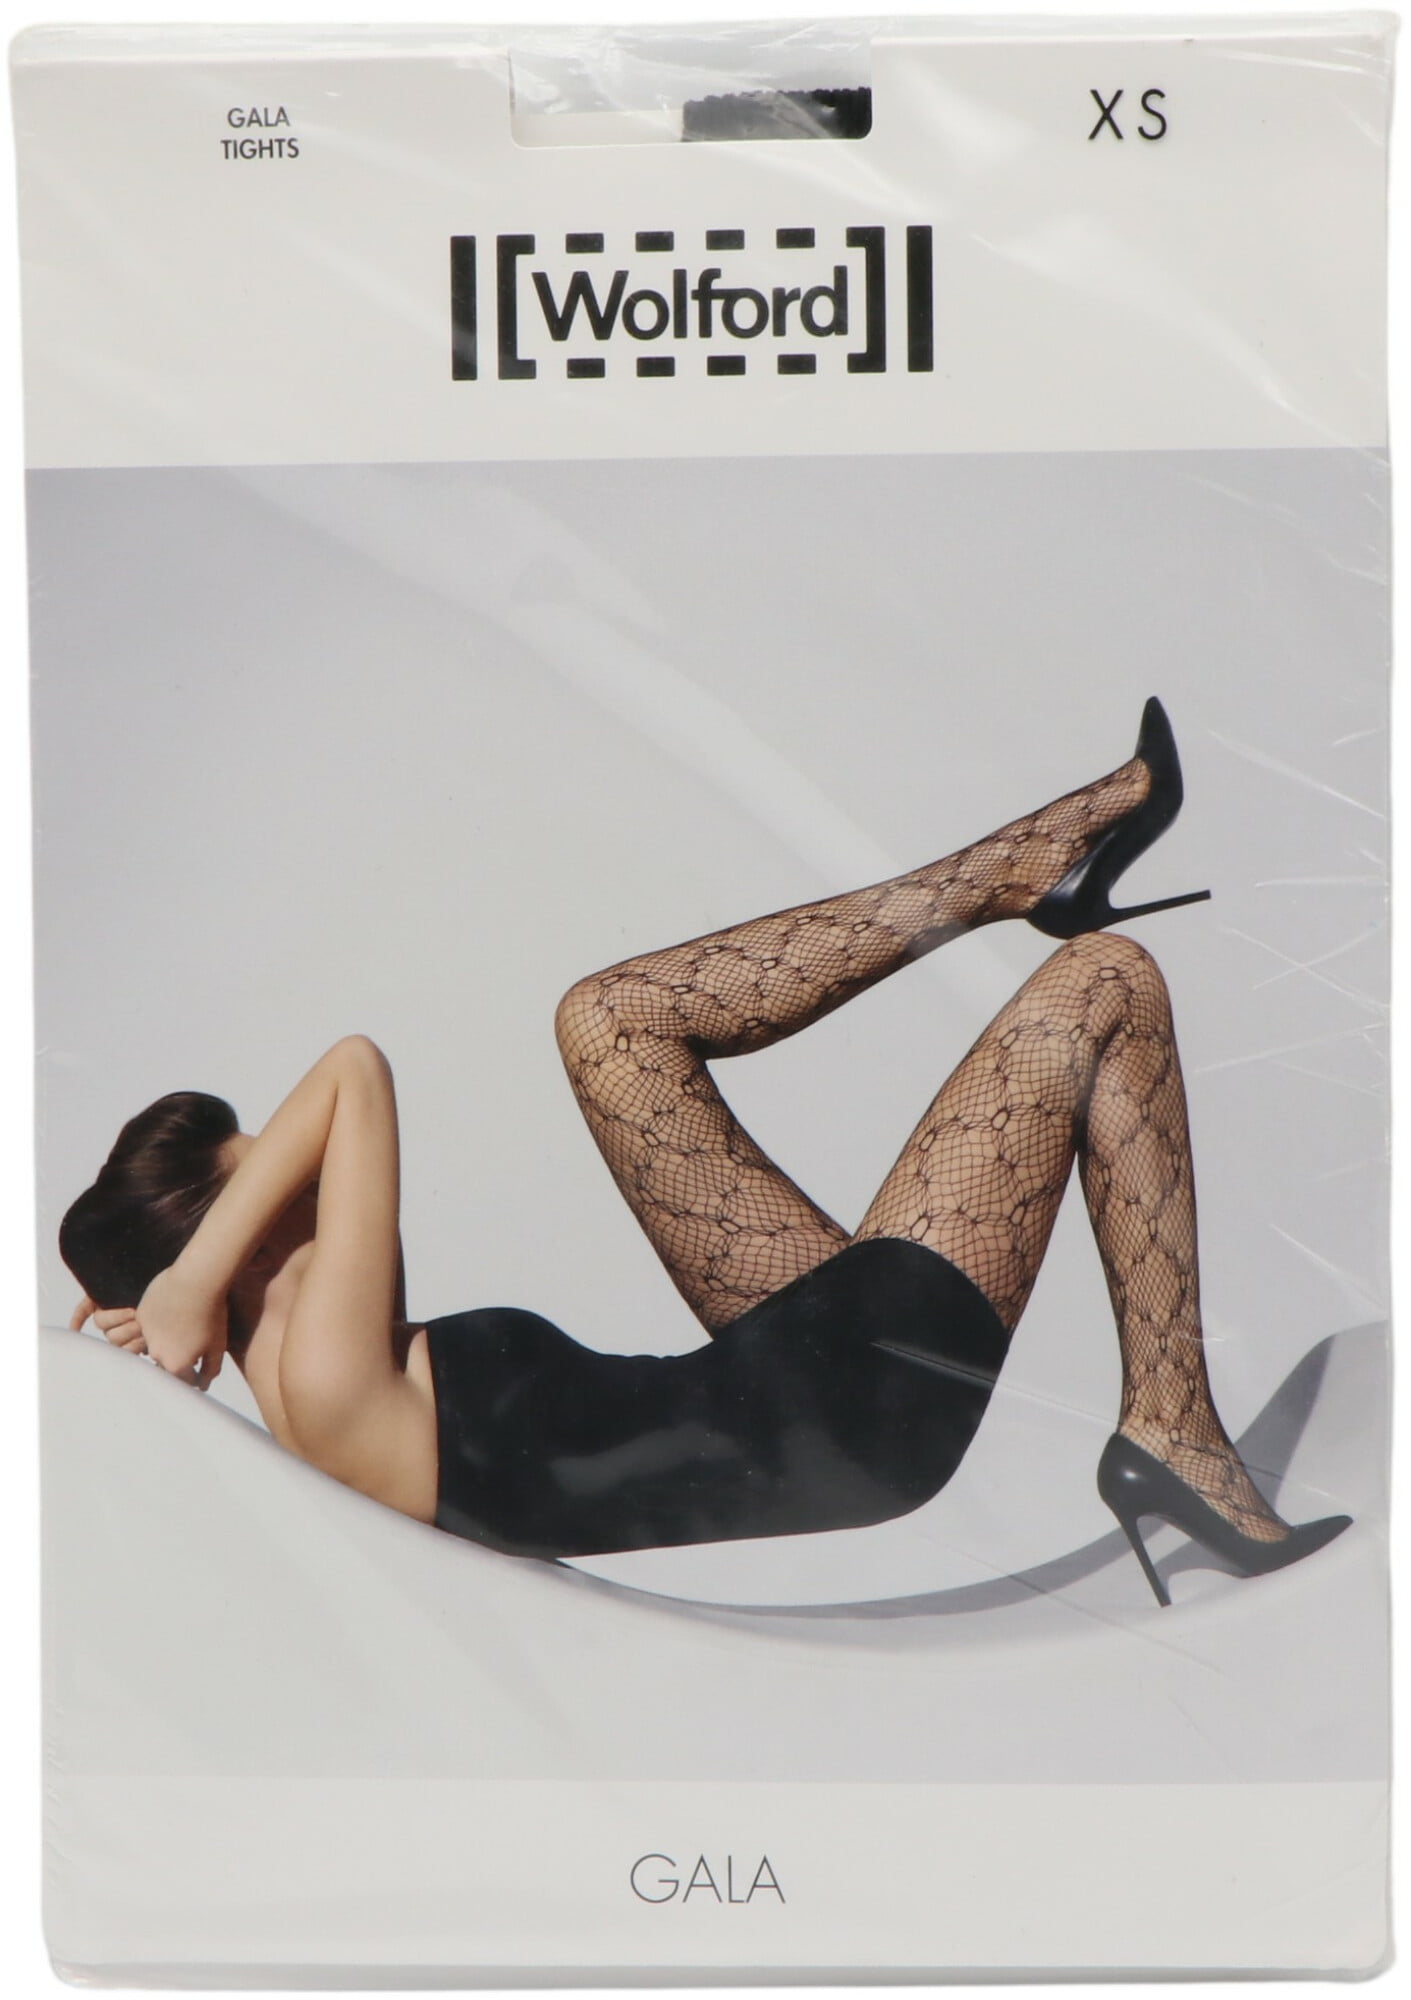 Hold-ups Wolford Women Women Accessories Wolford Women Socks Hold-ups WOLFORD 3 beige Tights & Leggings Wolford Women Tights & Stockings Wolford Women Hold-ups Wolford Women 